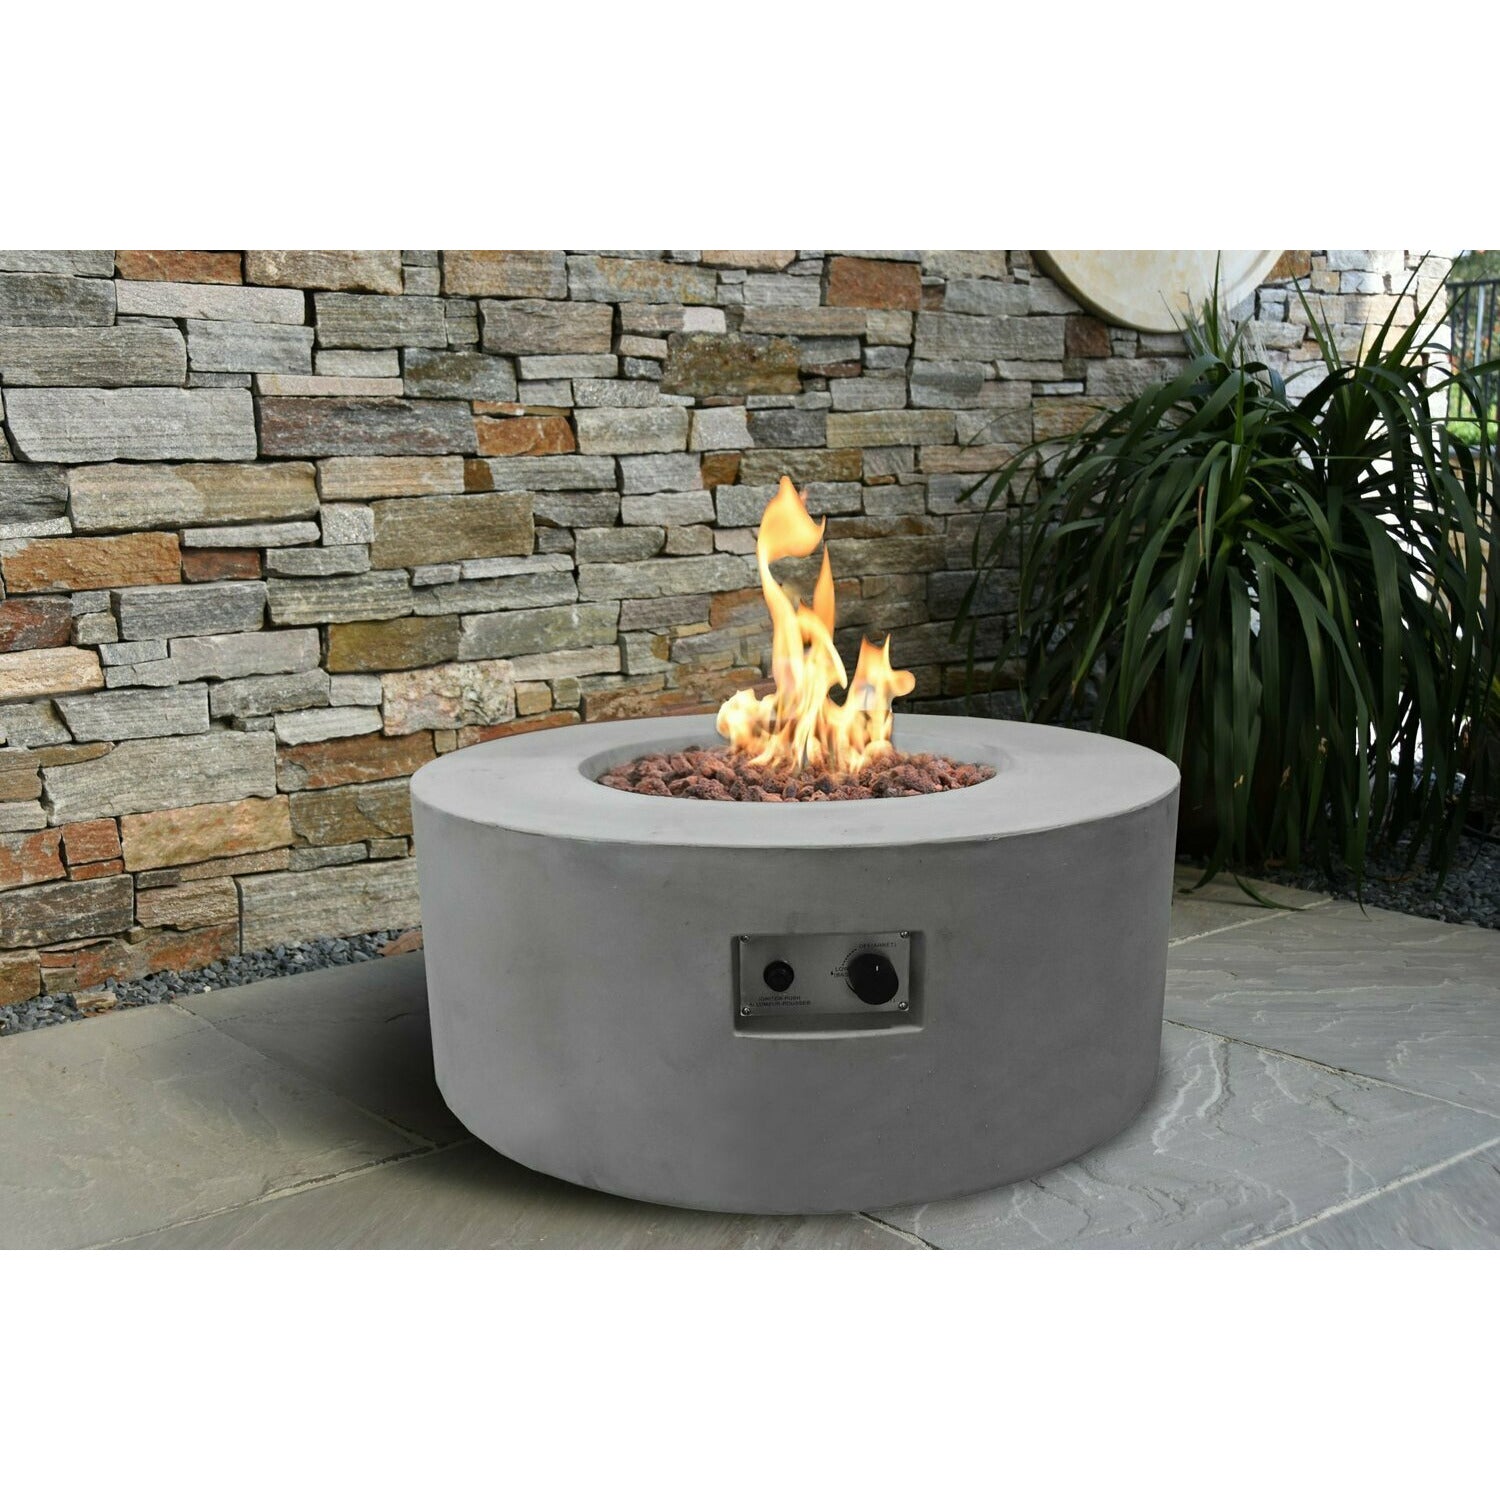 Elementi Tramore Fire Bowl for Liquid Propane Gas or Natural Gas in Light Grey (Includes PVC Cover) - PadioLiving - Elementi Tramore Fire Bowl for Liquid Propane Gas or Natural Gas in Light Grey (Includes PVC Cover) - Fire Pit - PadioLiving